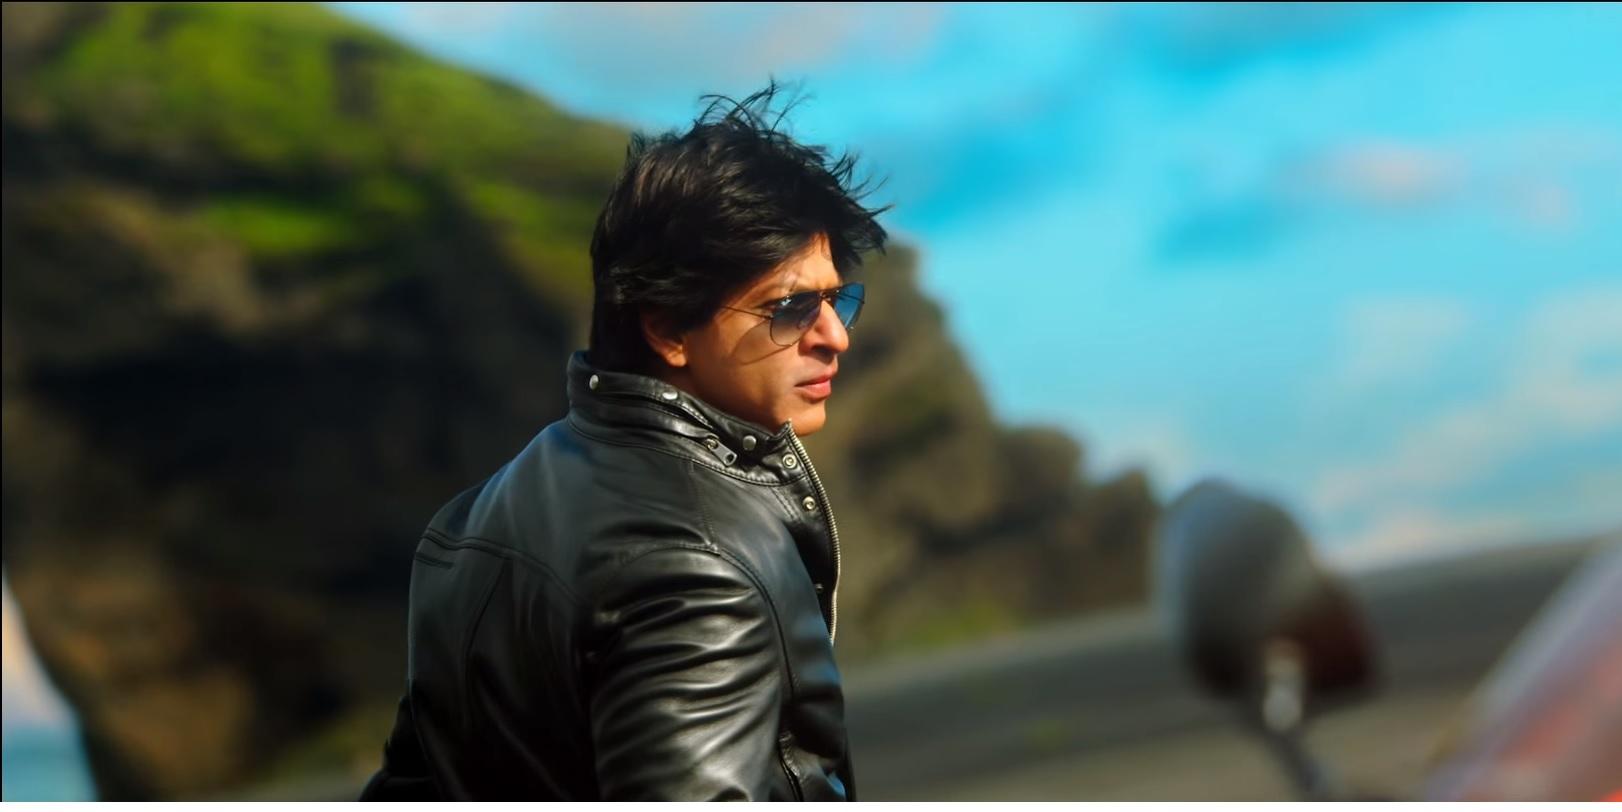 dilwale songs mp3 free download 2015